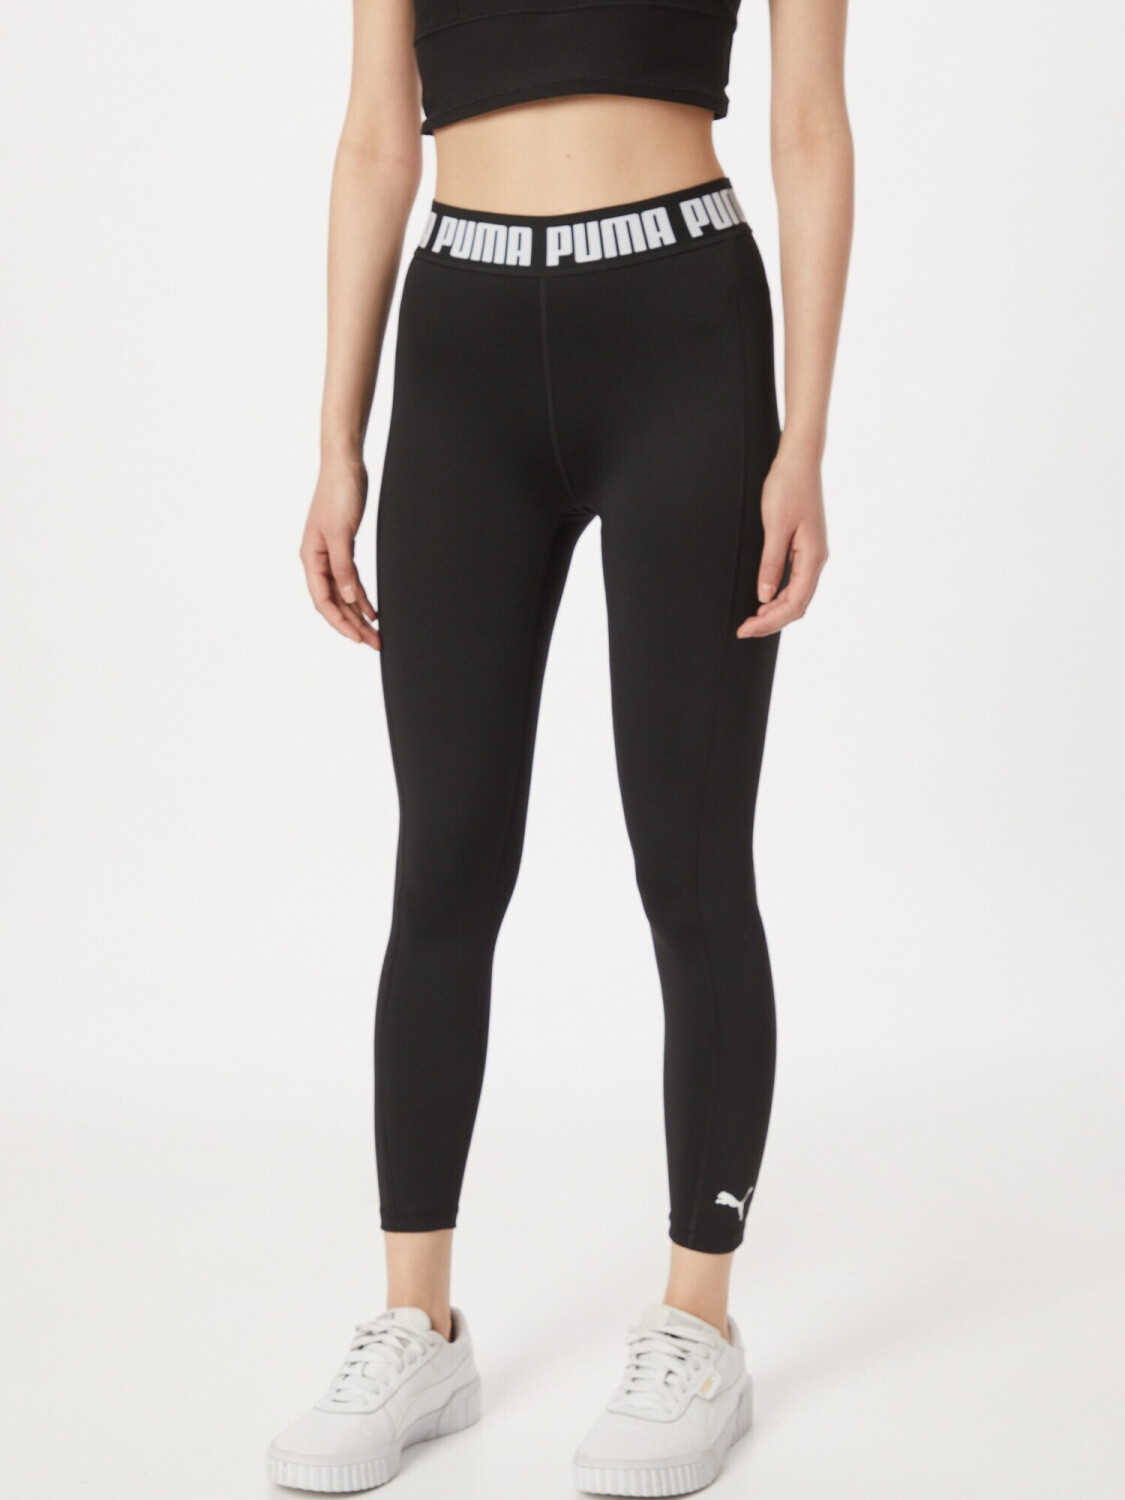 Buy Puma Leggings Strong High Waist Full (521601) puma black from £12.00  (Today) – Best Deals on